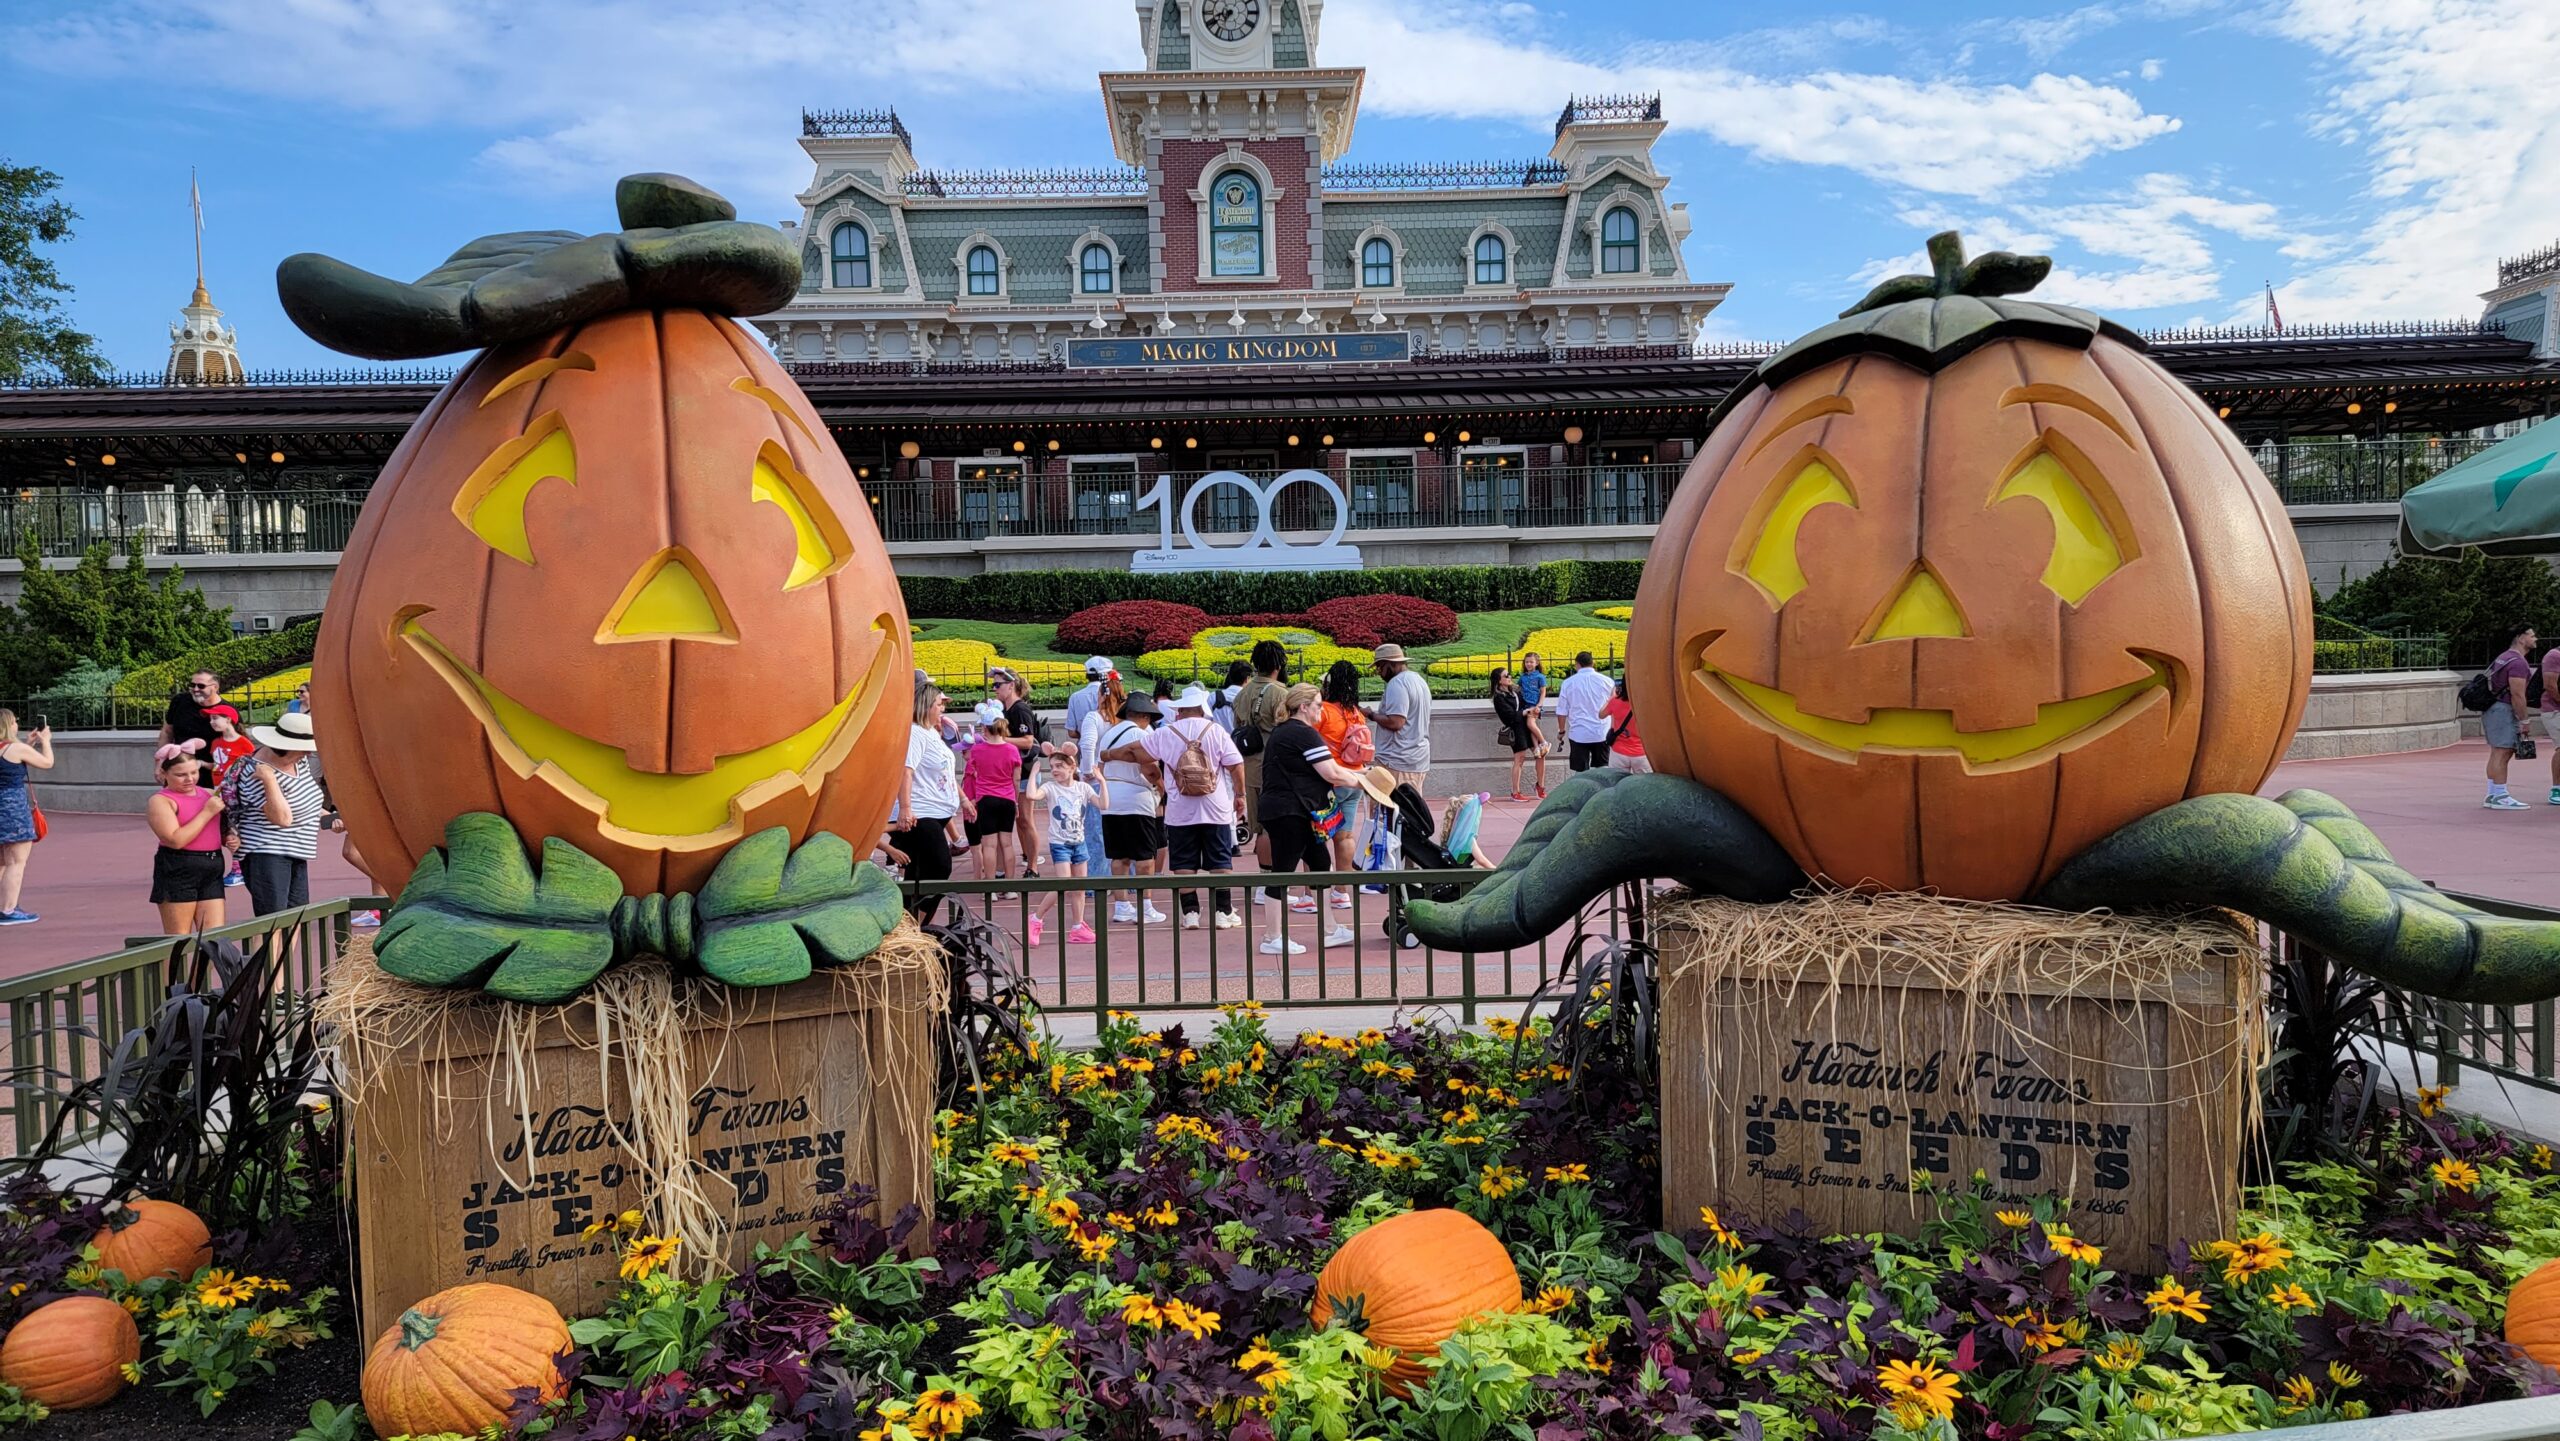 Check Out All The Fun at Walt Disney World This Fall